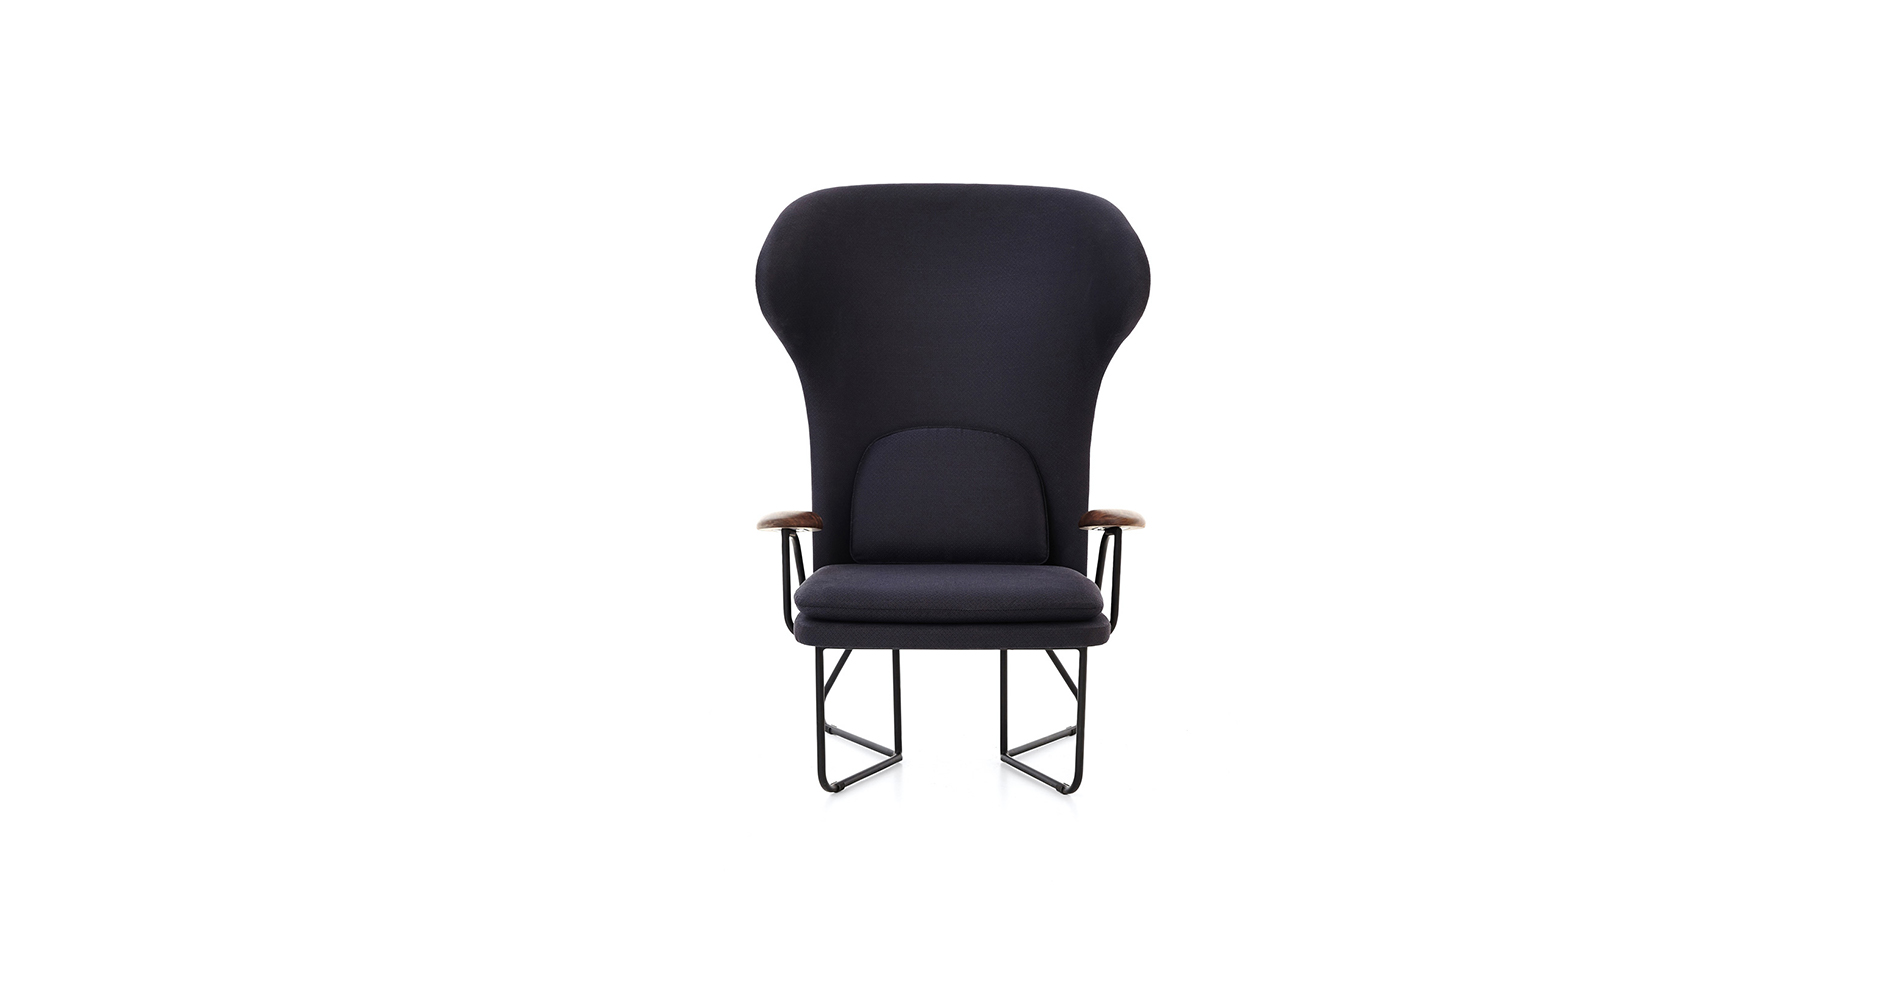 An image of Chillax Highback Chair